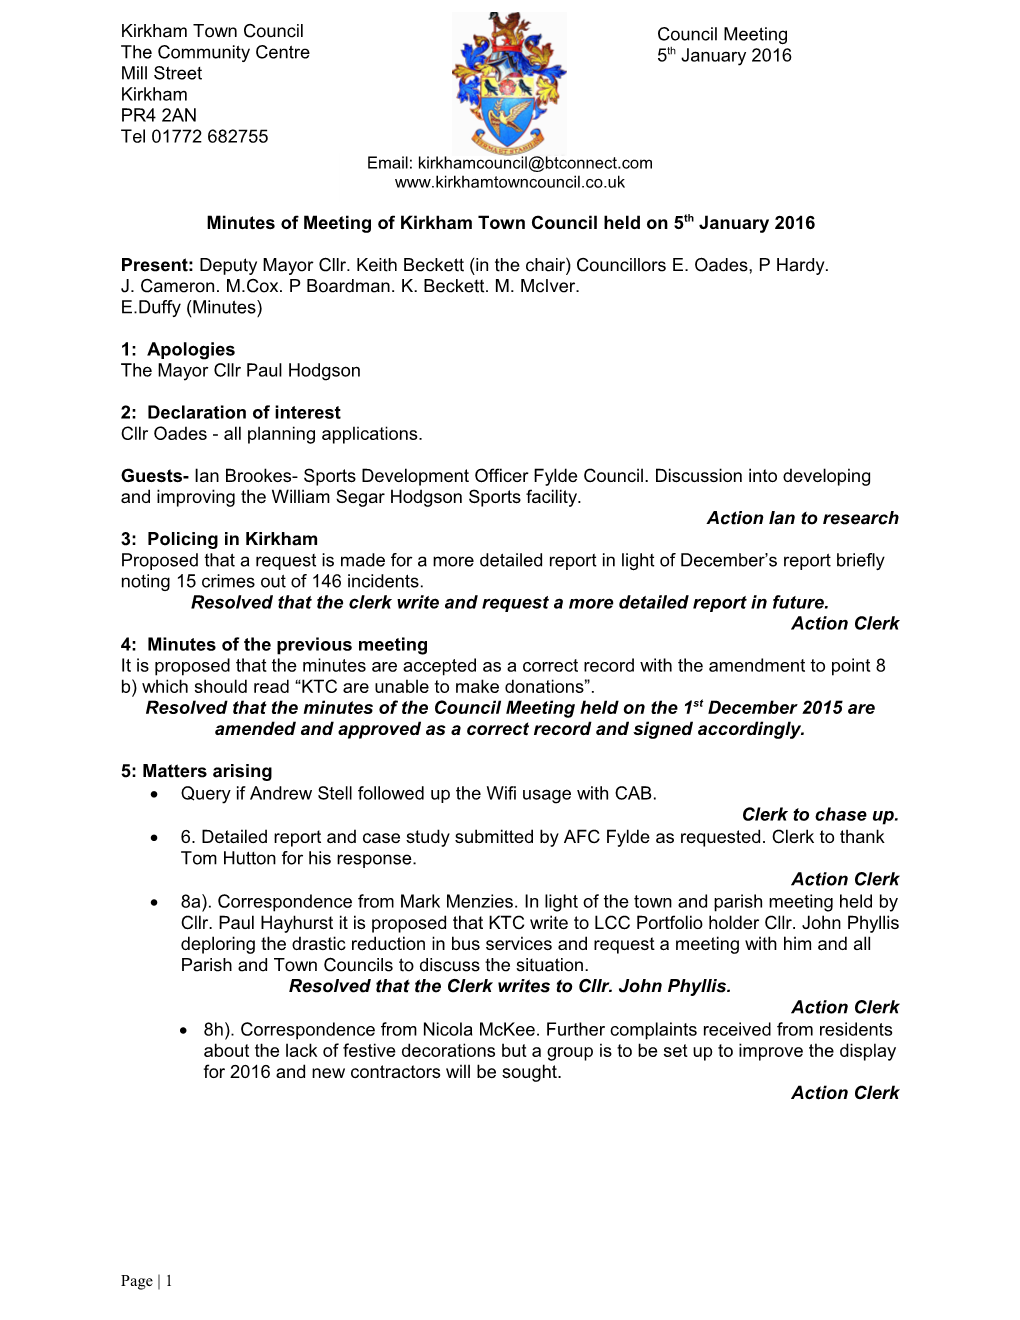 Minutes of Meeting of Kirkham Town Council Held on 5Th January 2016